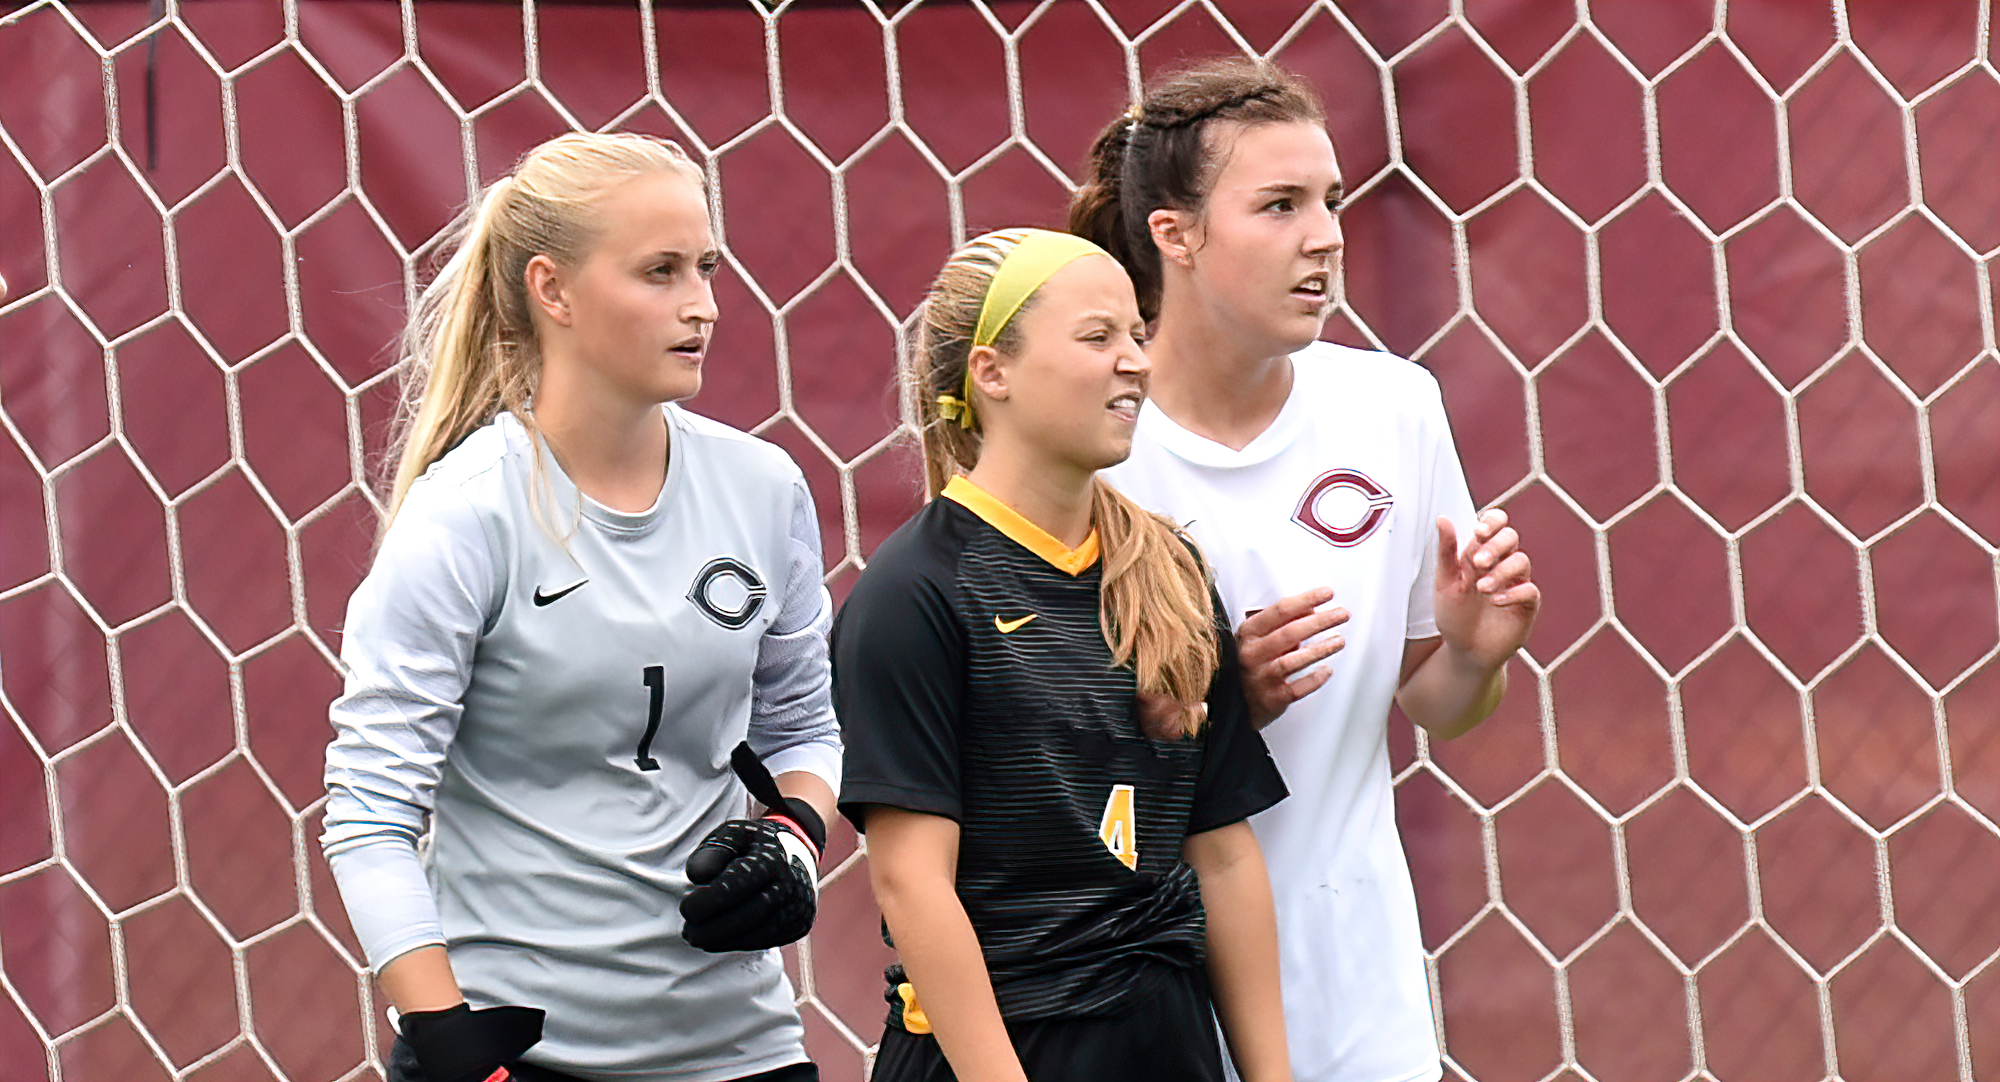 Junior goalie Bre Nelson made four saves to record the shutout in the Cobbers' 0-0 tie at St. Scholastica.